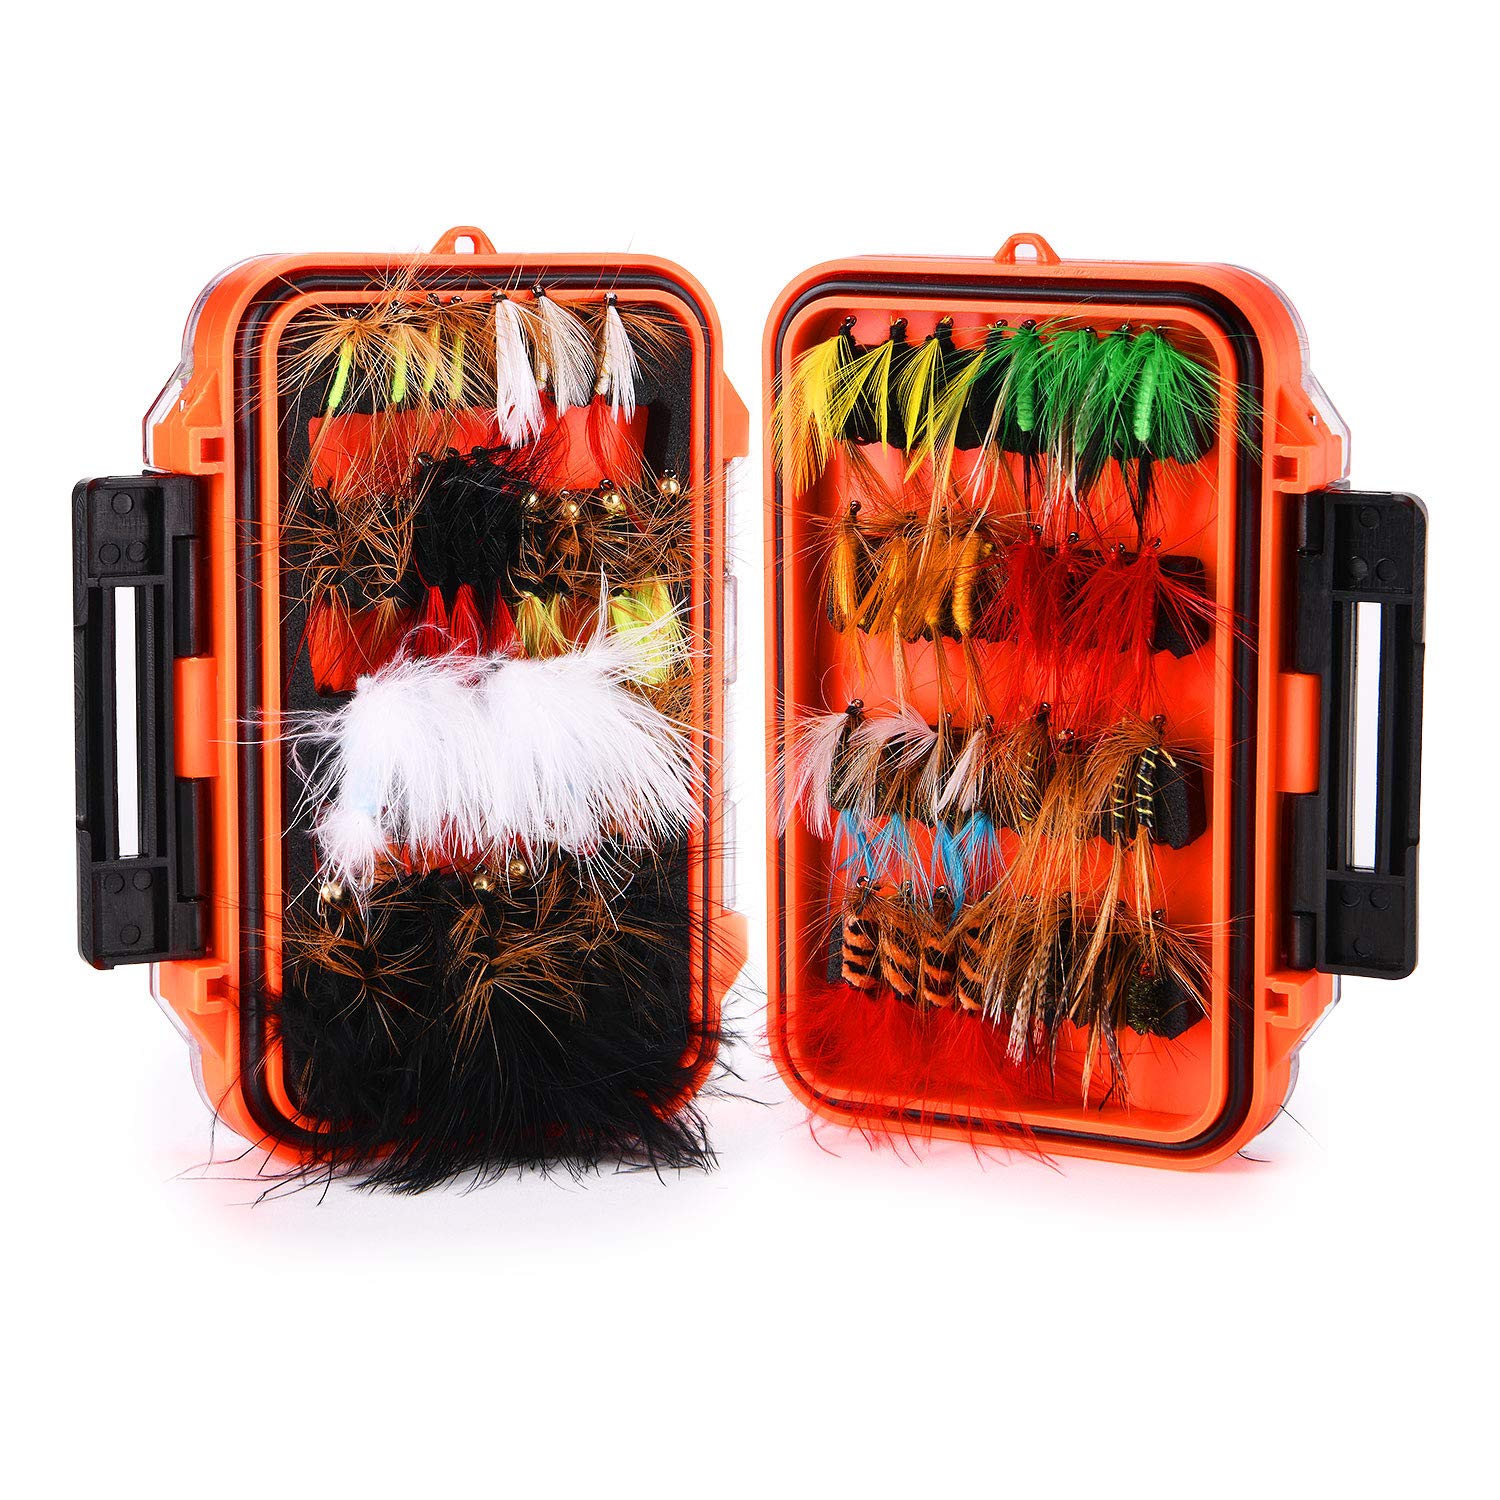 Fly Fishing Flies Kit with Box, Dry Wet Flies, Nymphs, Streamers for Bass  Salmon Trout Fishing 120Pcs/64Pcs